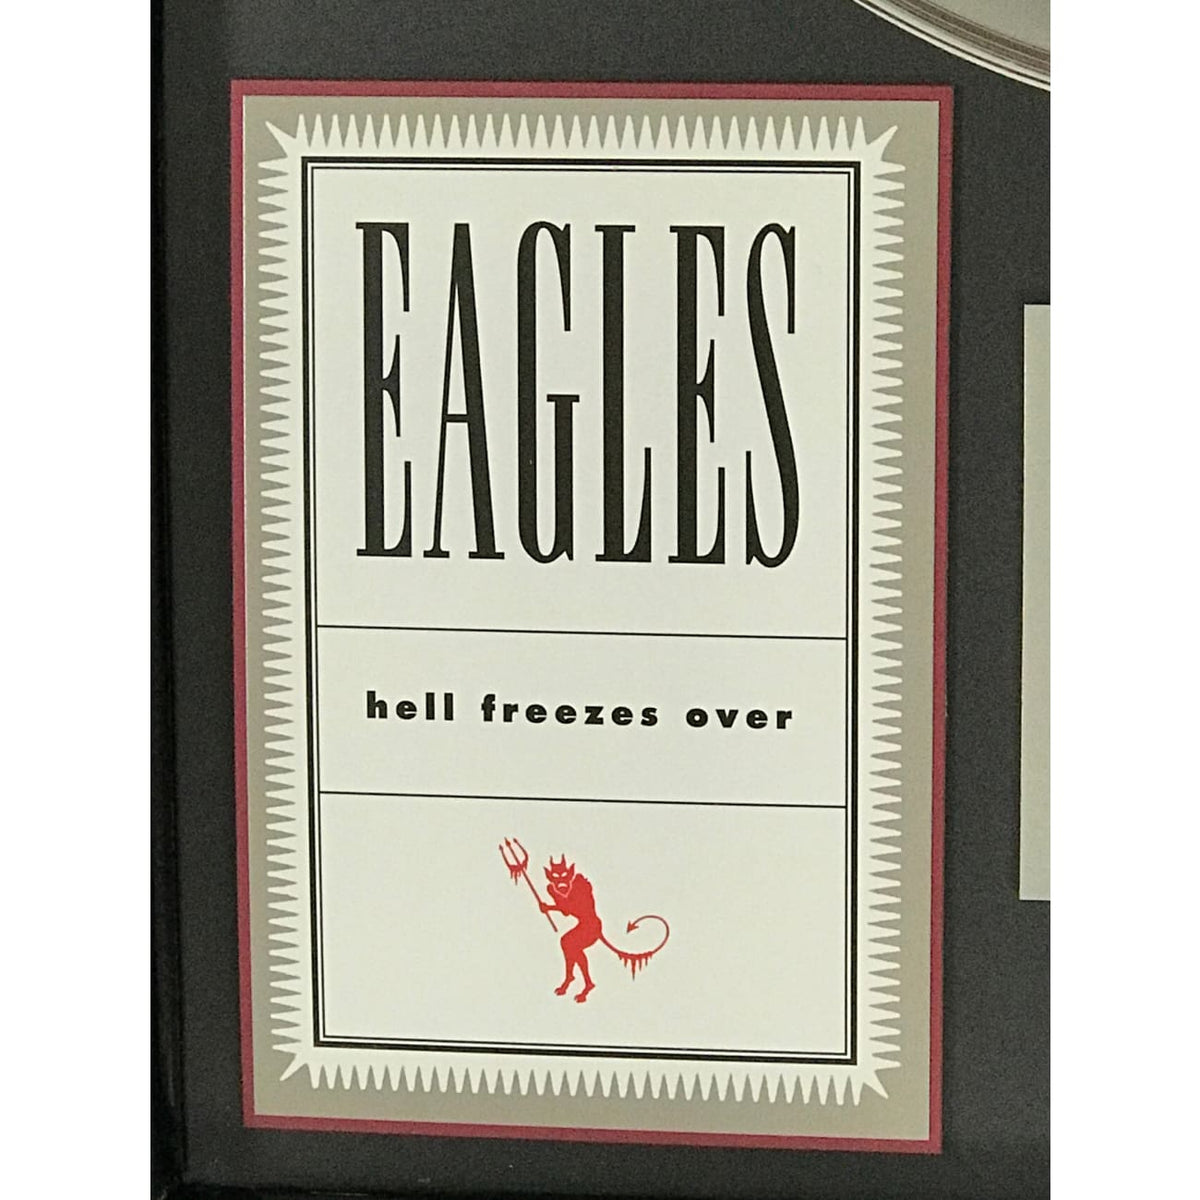 Eagles - Hell Freezes Over – Rollin' Records